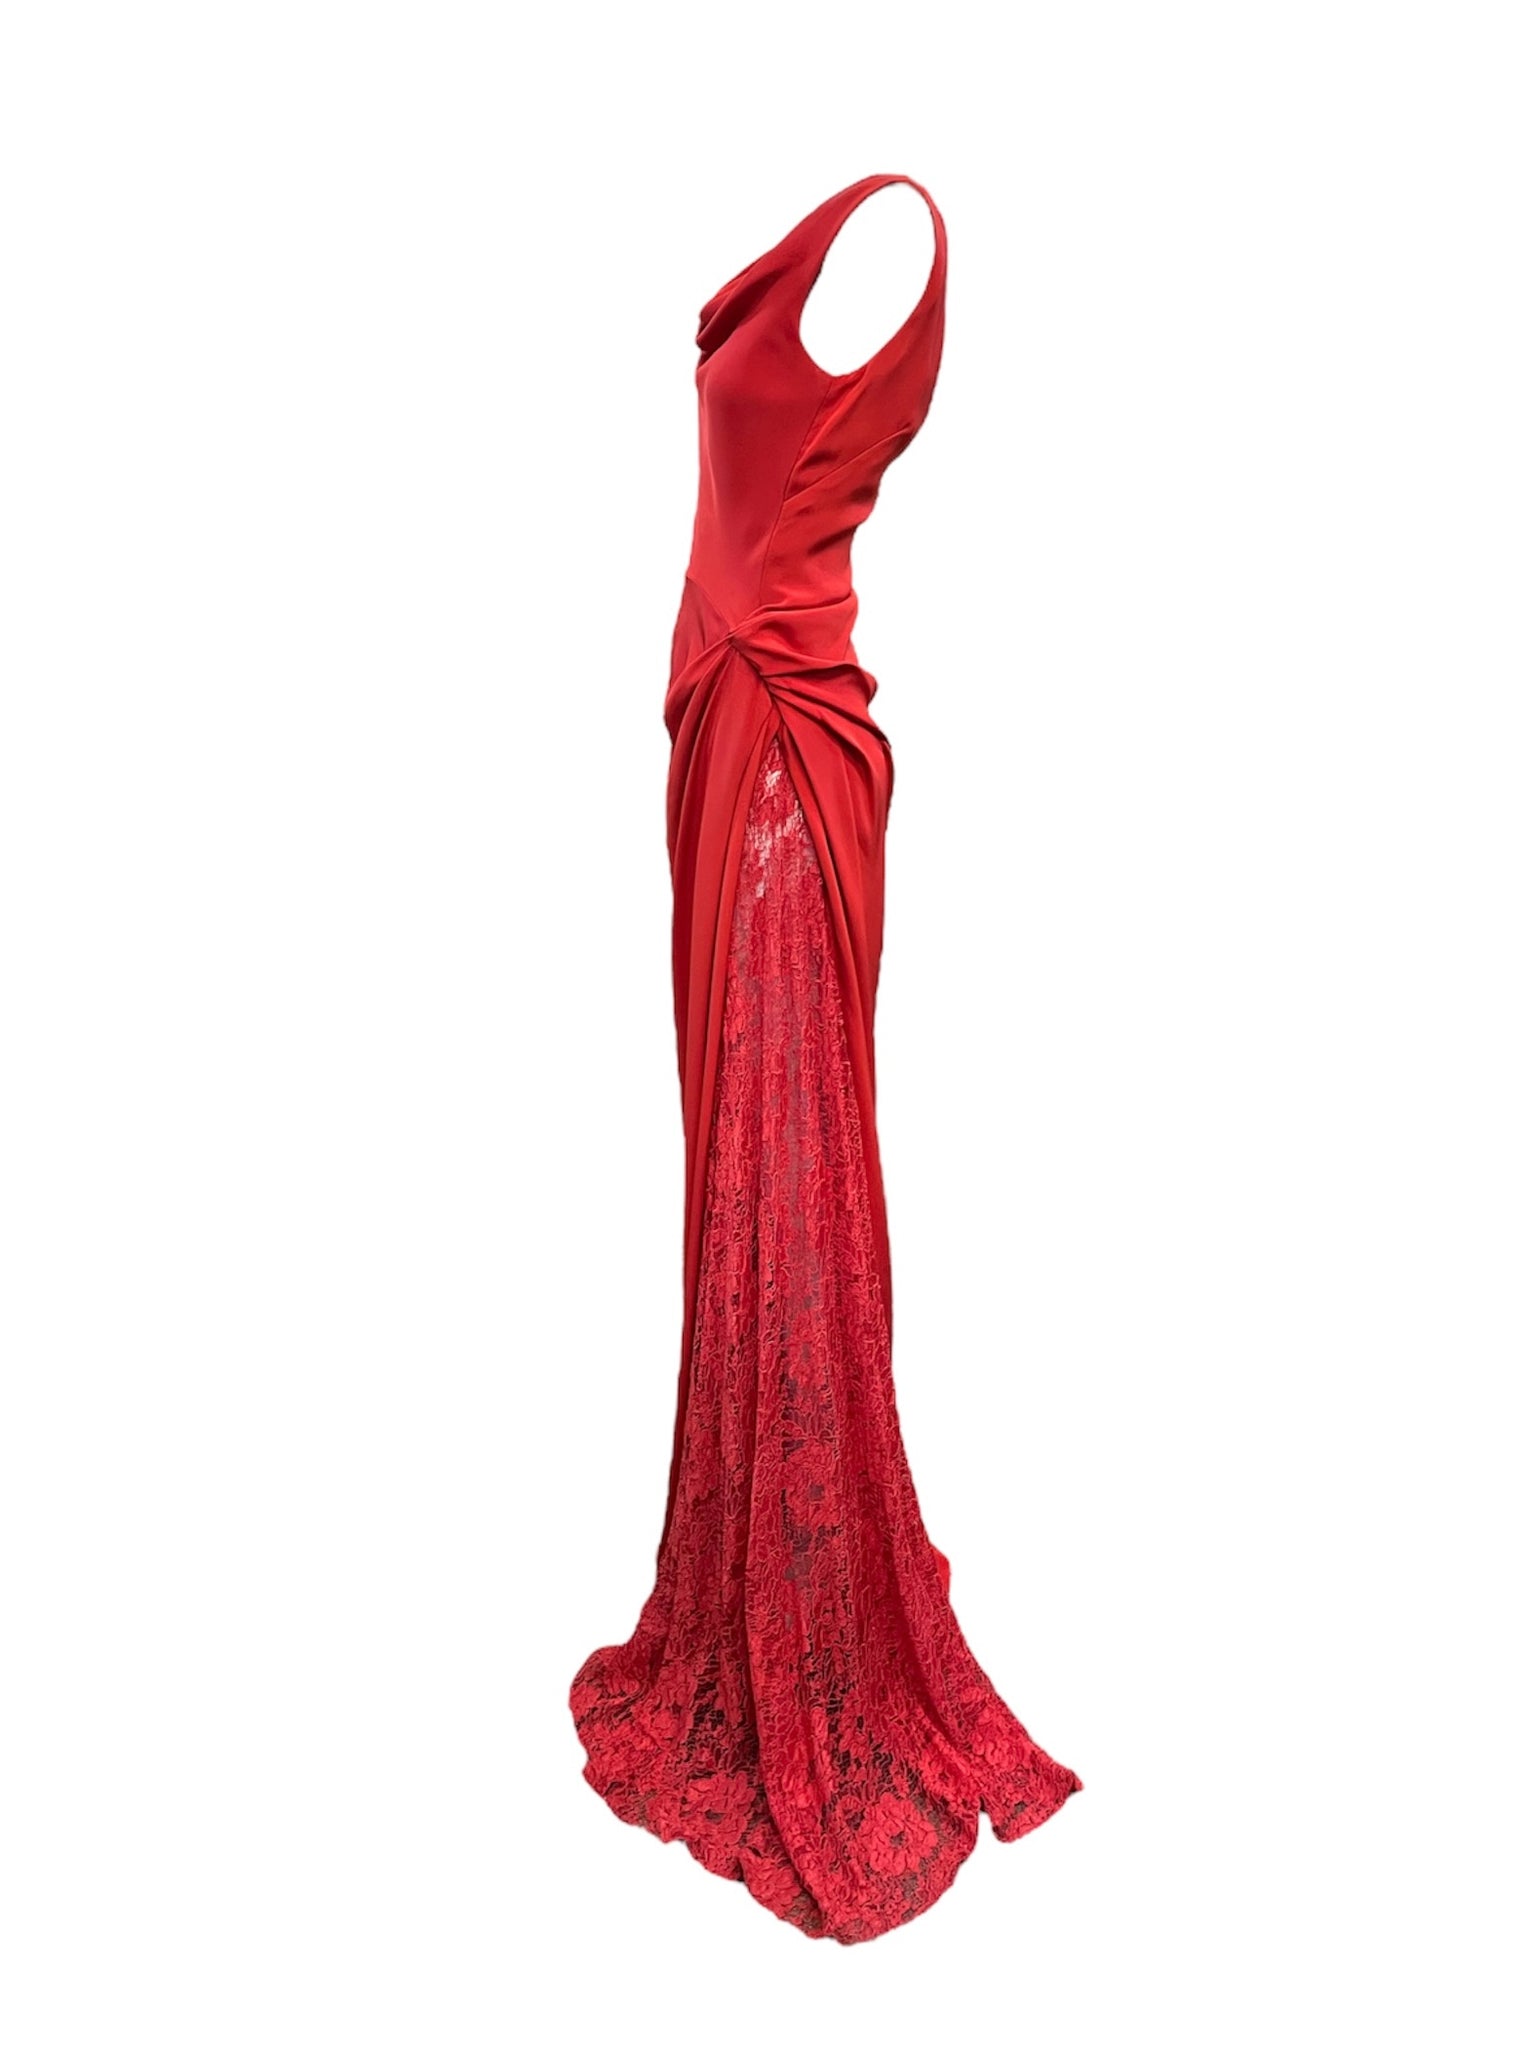 2010s Lorena Sarbu  Attribution Red Silk Gown with Train SIDE 2 of 4